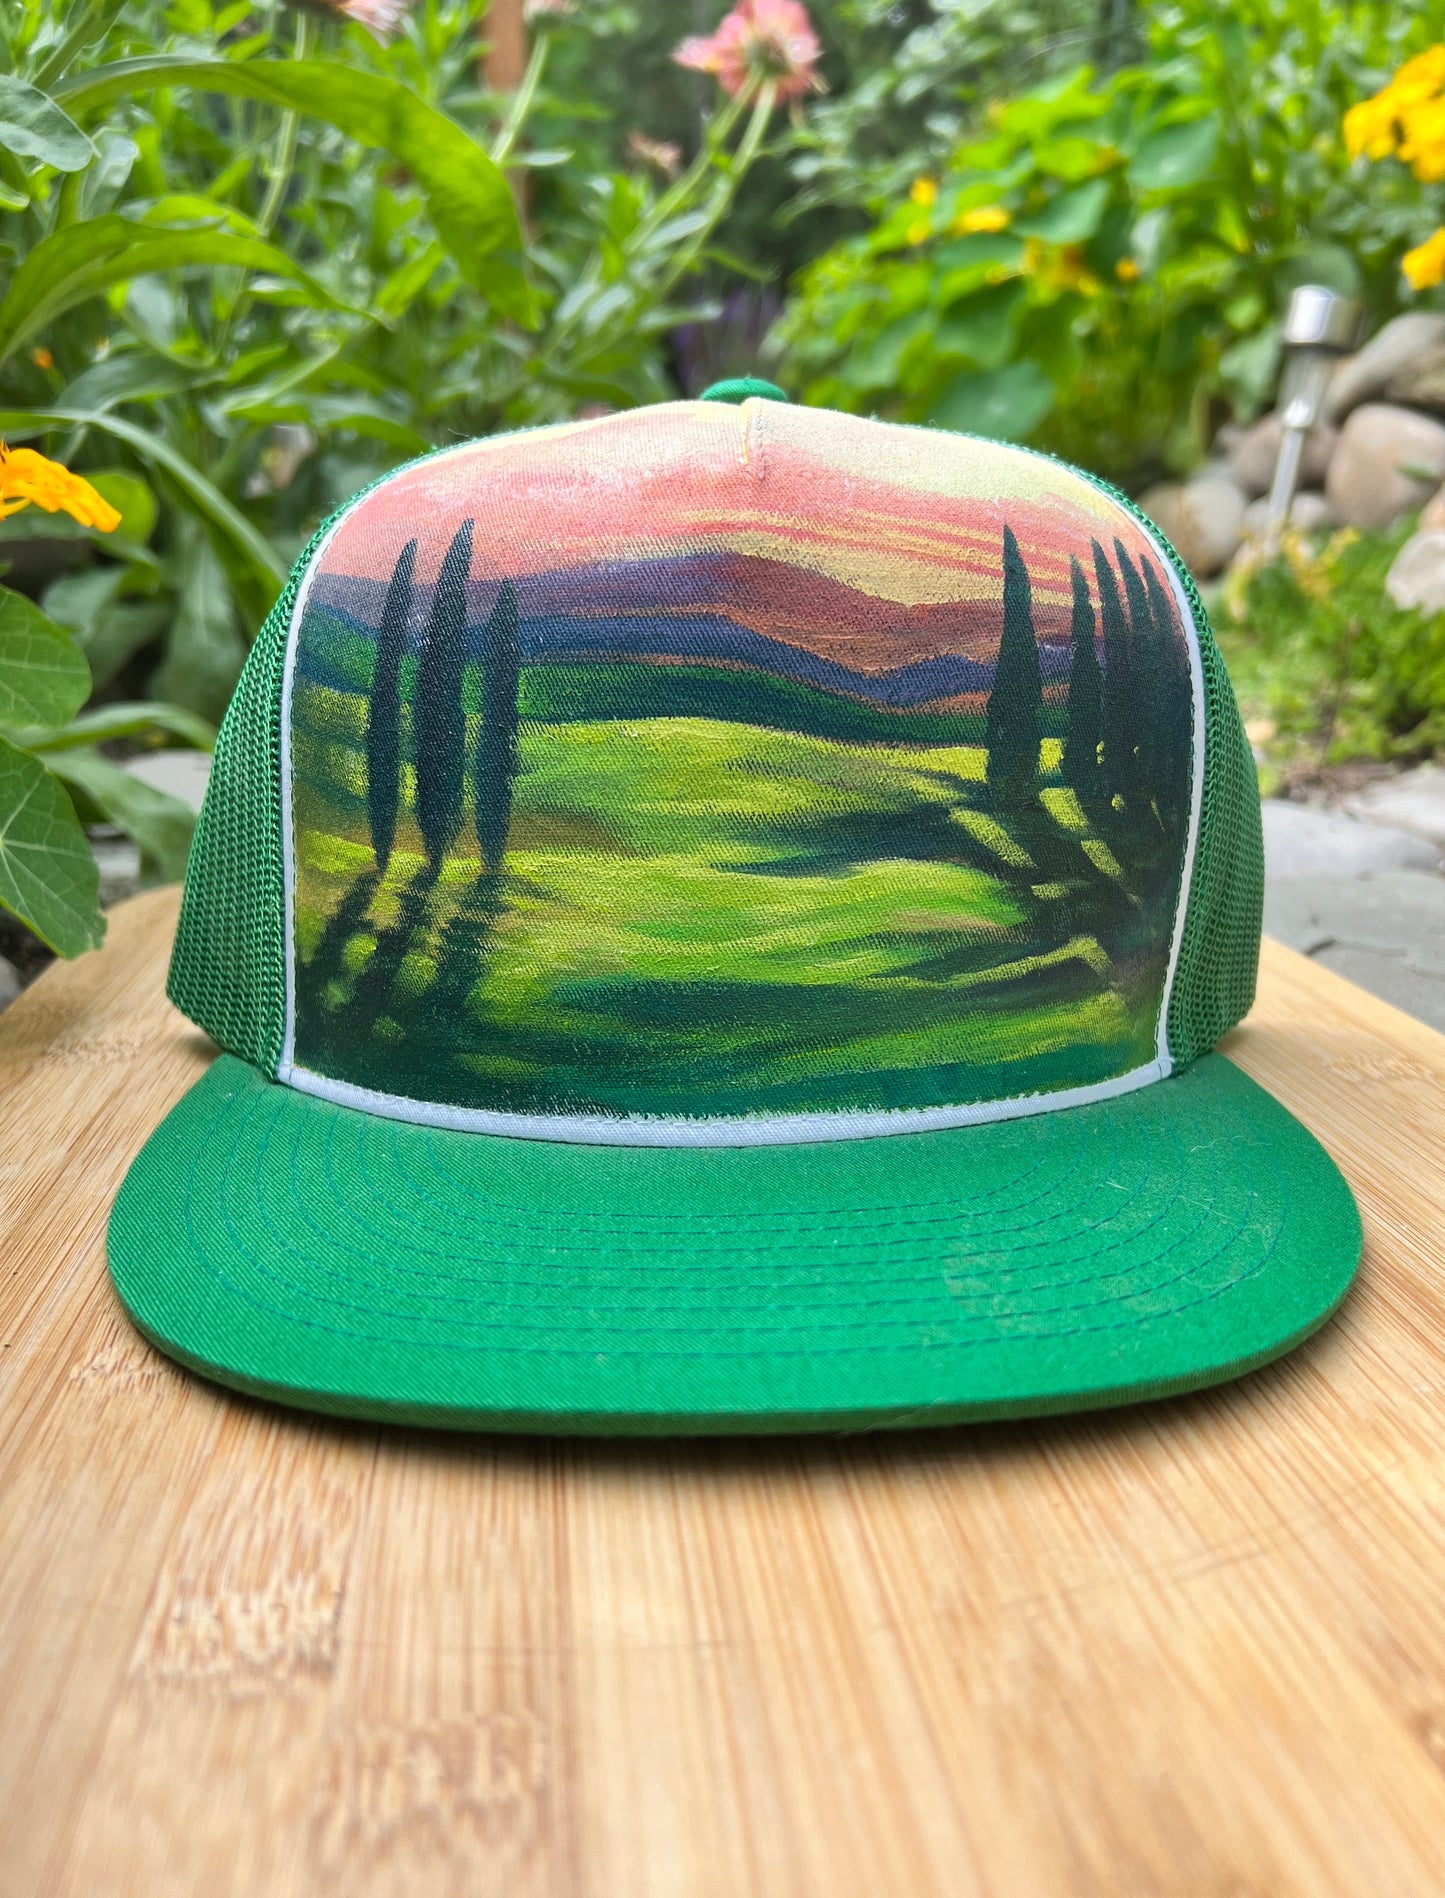 "Green Hills" Hand Painted Hat